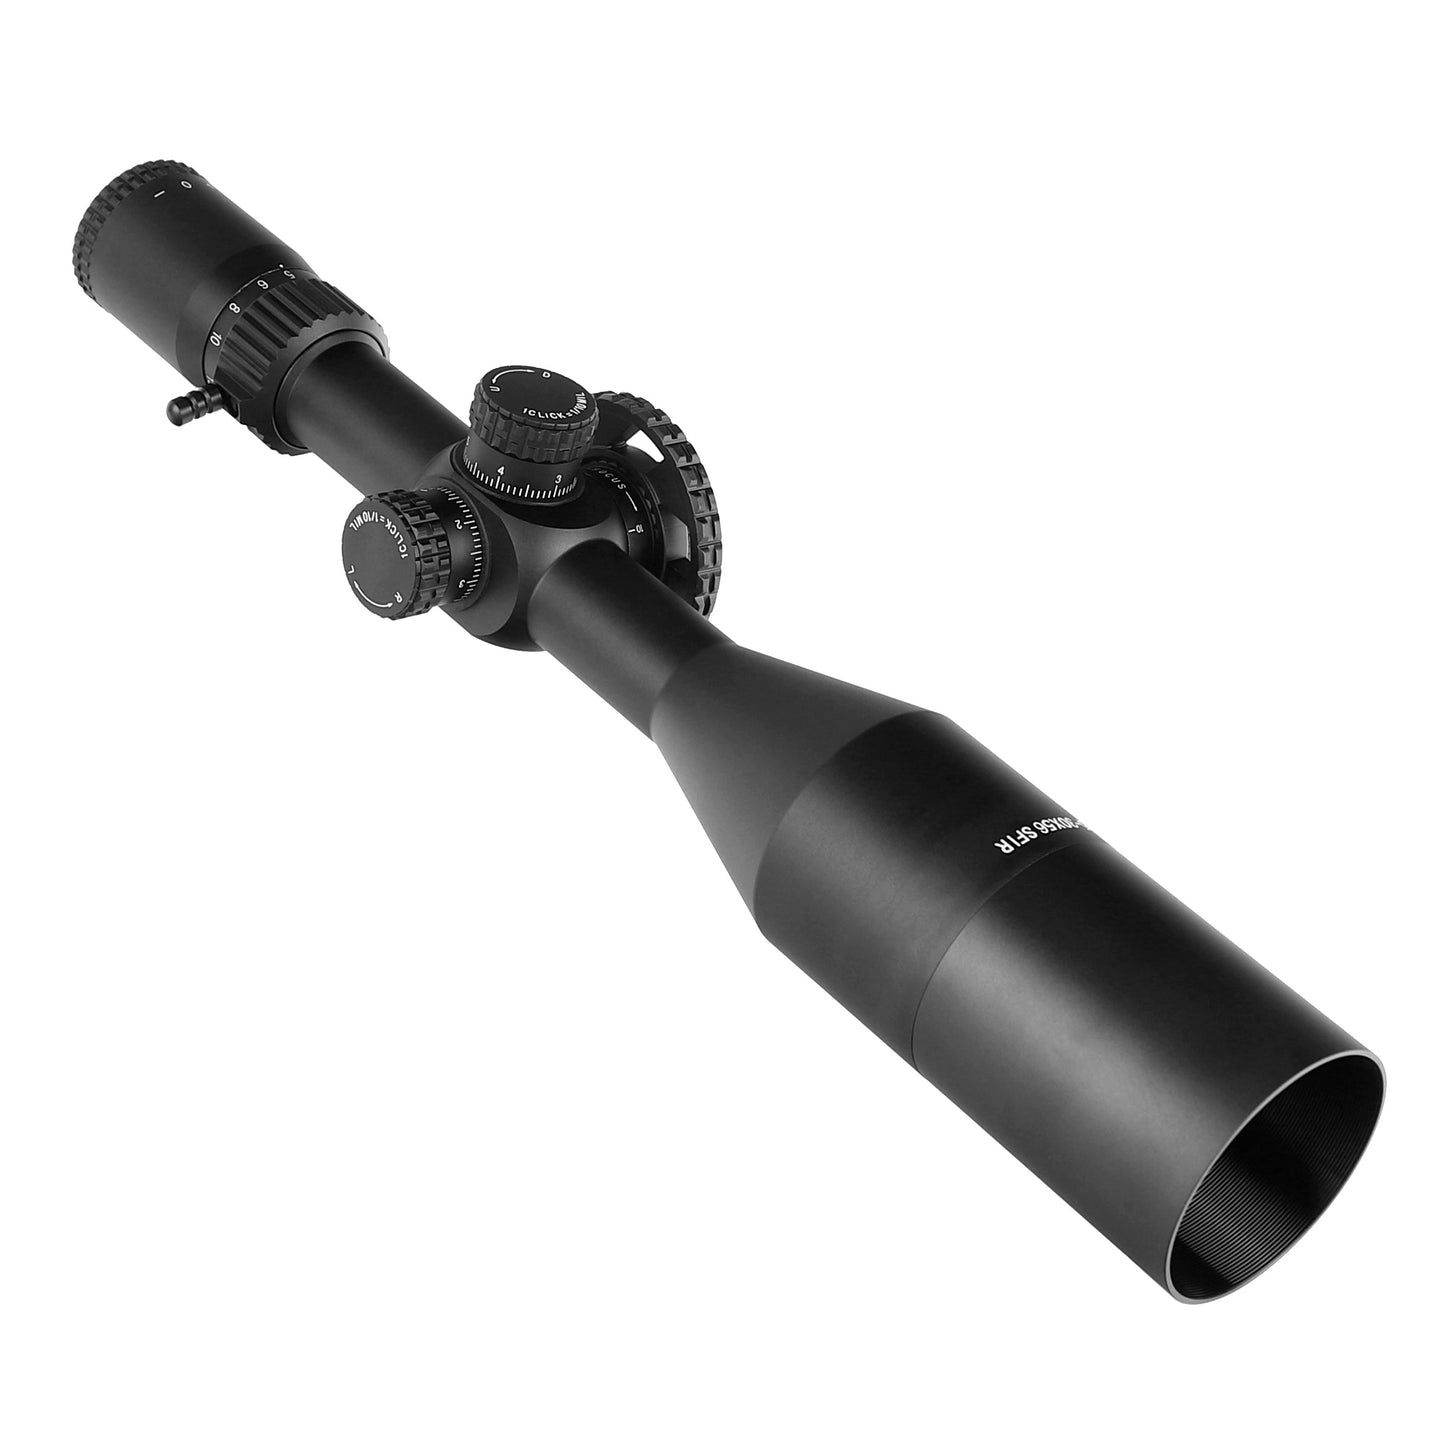 ohhunt® LR 5-30x56 SFIR Long Range Rifle Scope with Sunshade Wire Reticle